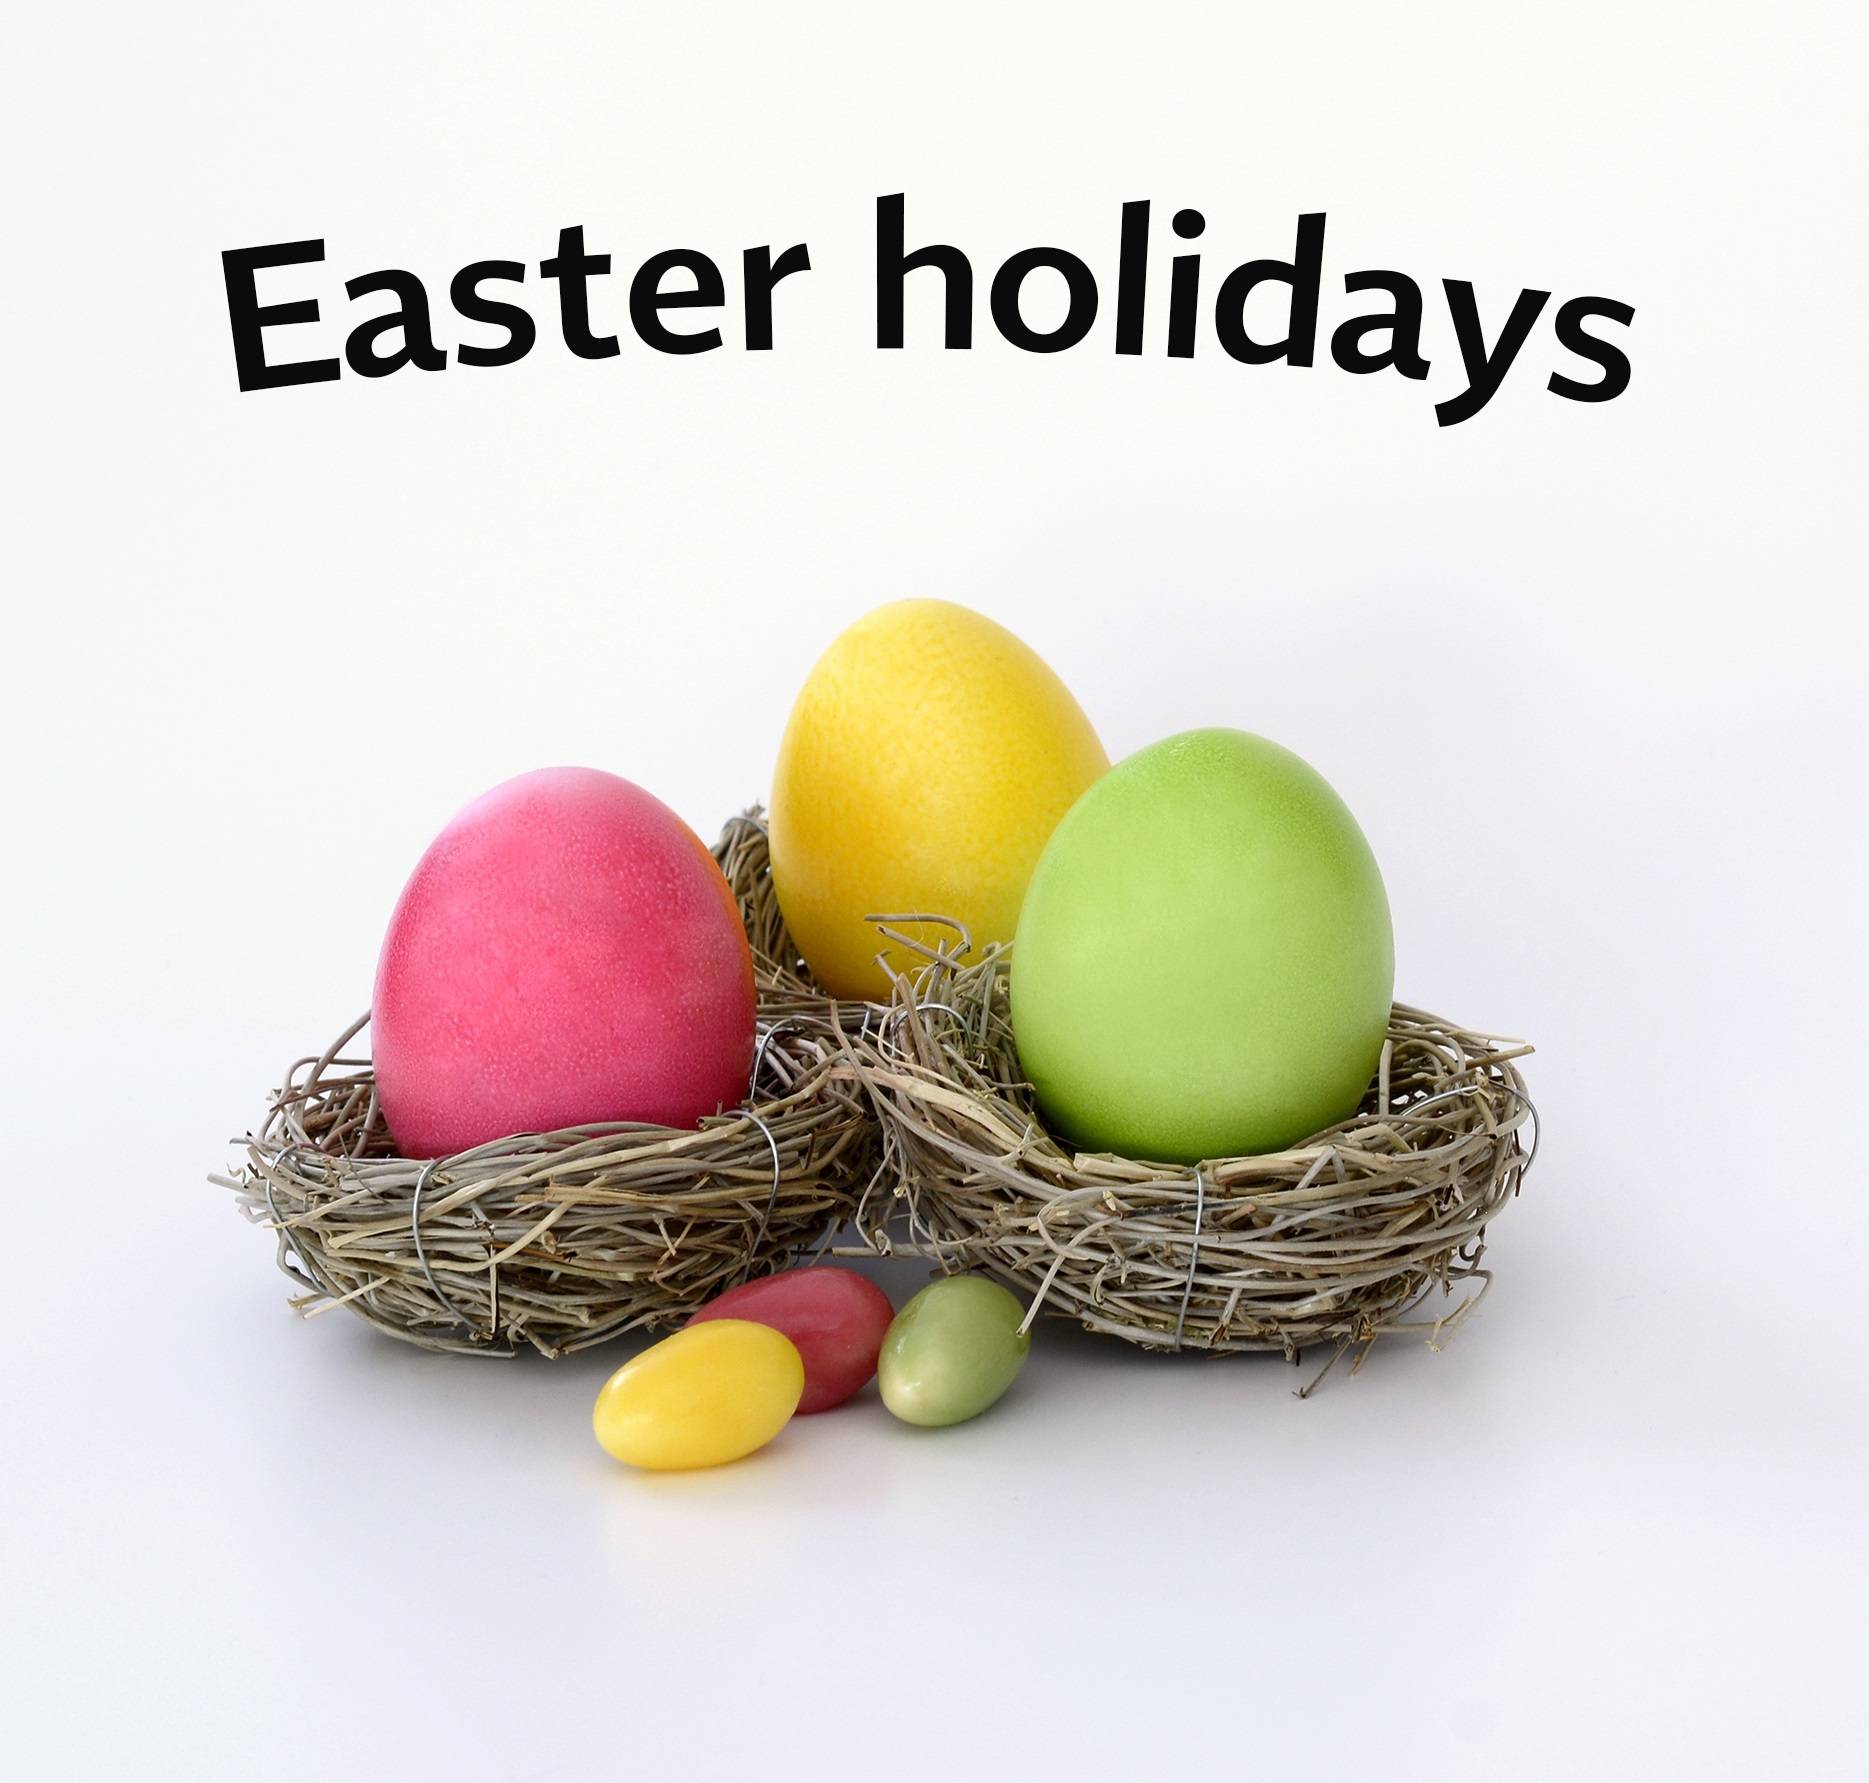 MILOS offices closed for the Easter holidays